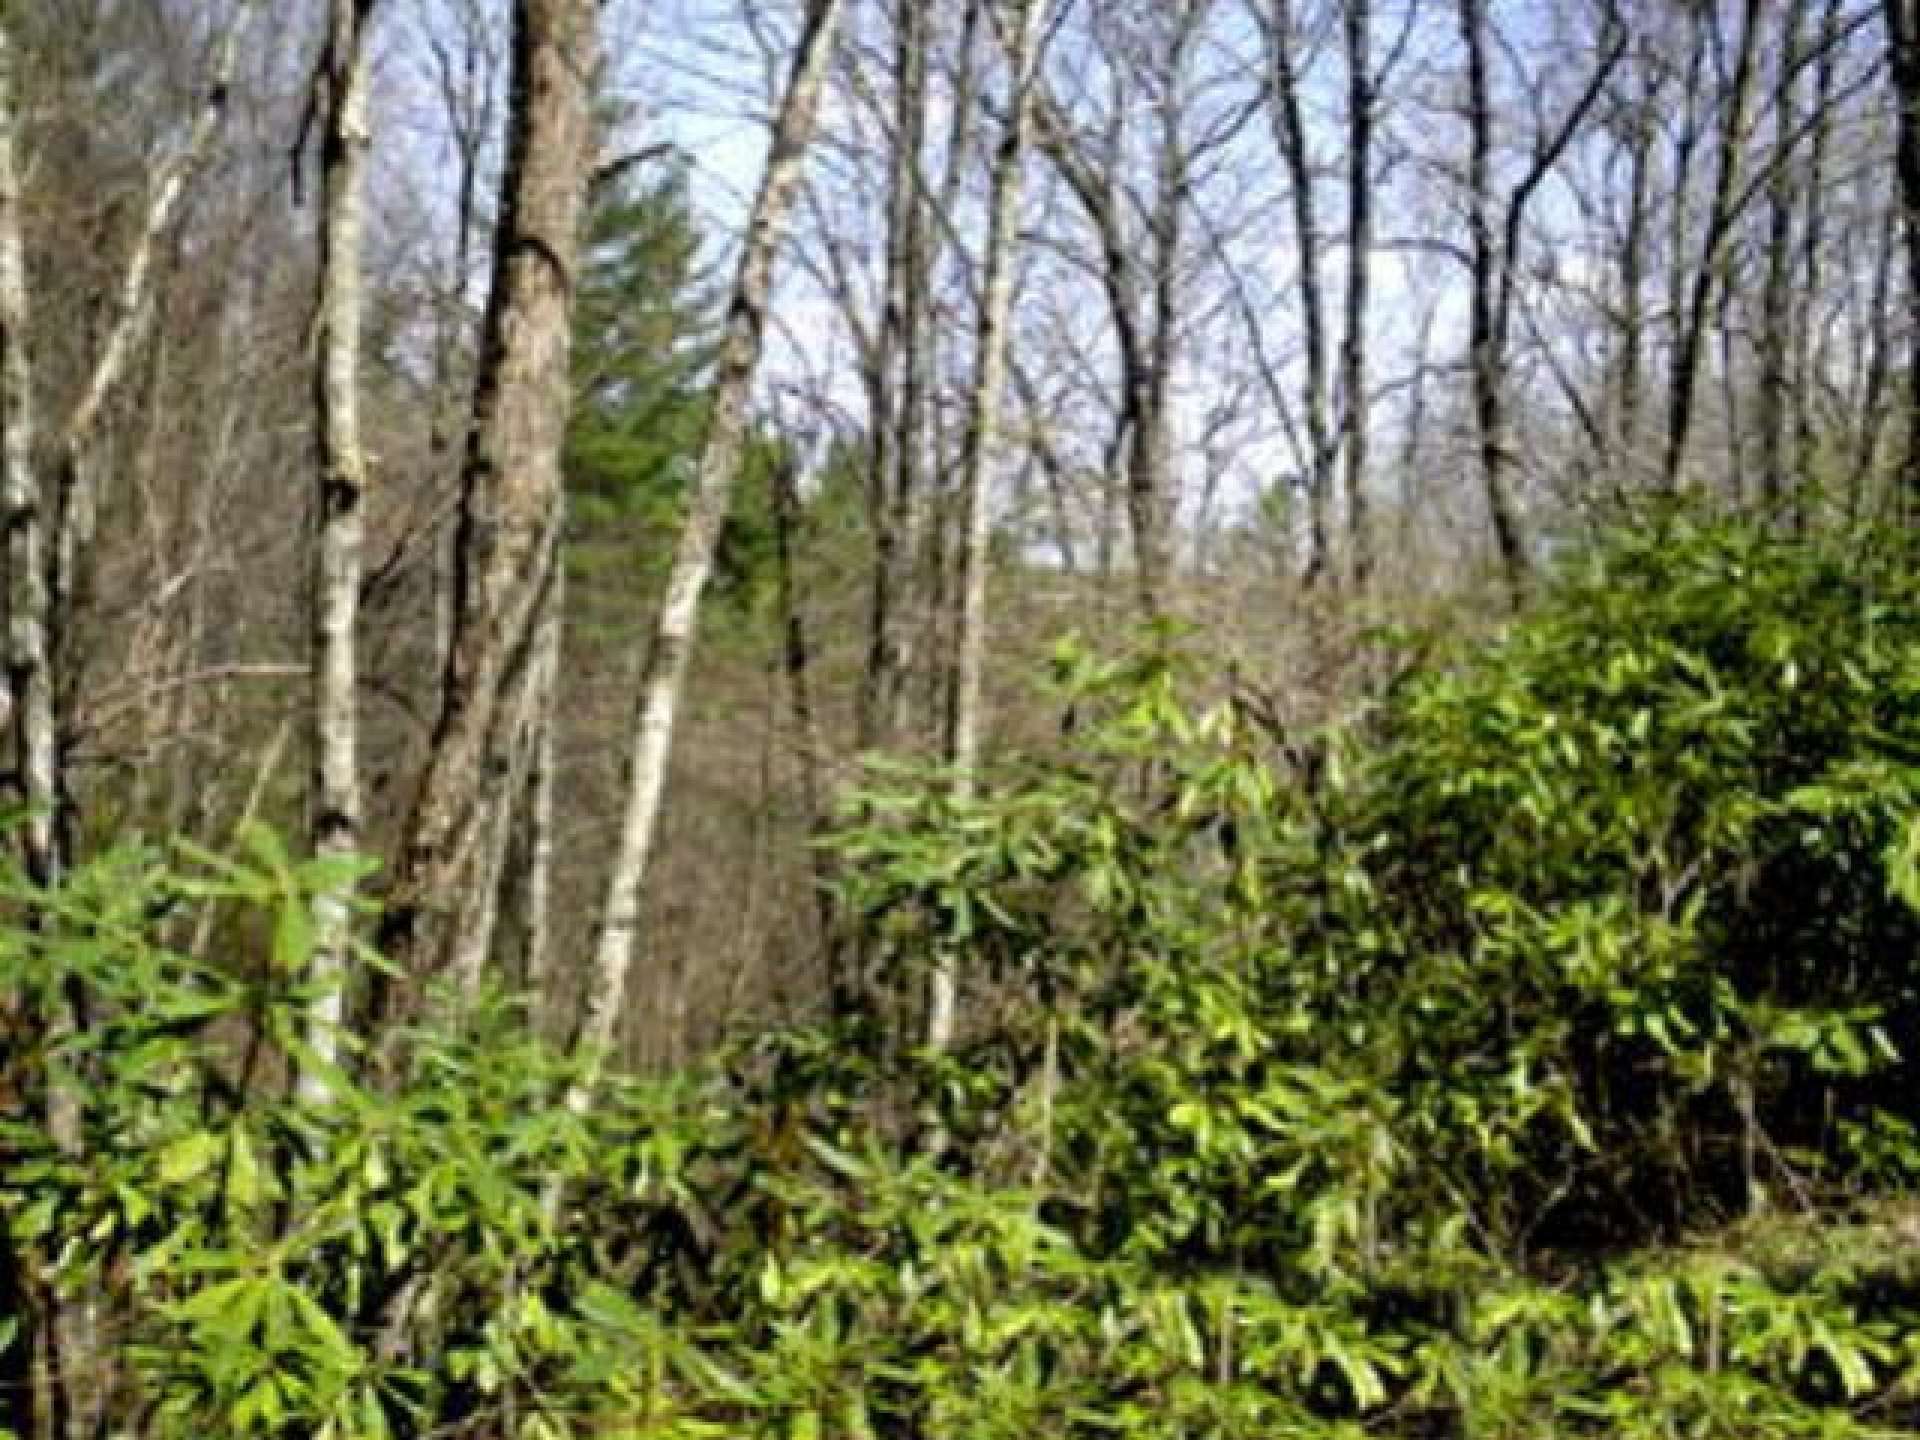 Call today for more information on our listing S261. This private tract in Davis Acres, the ideal location for NC Mountain retreat or primary residence.